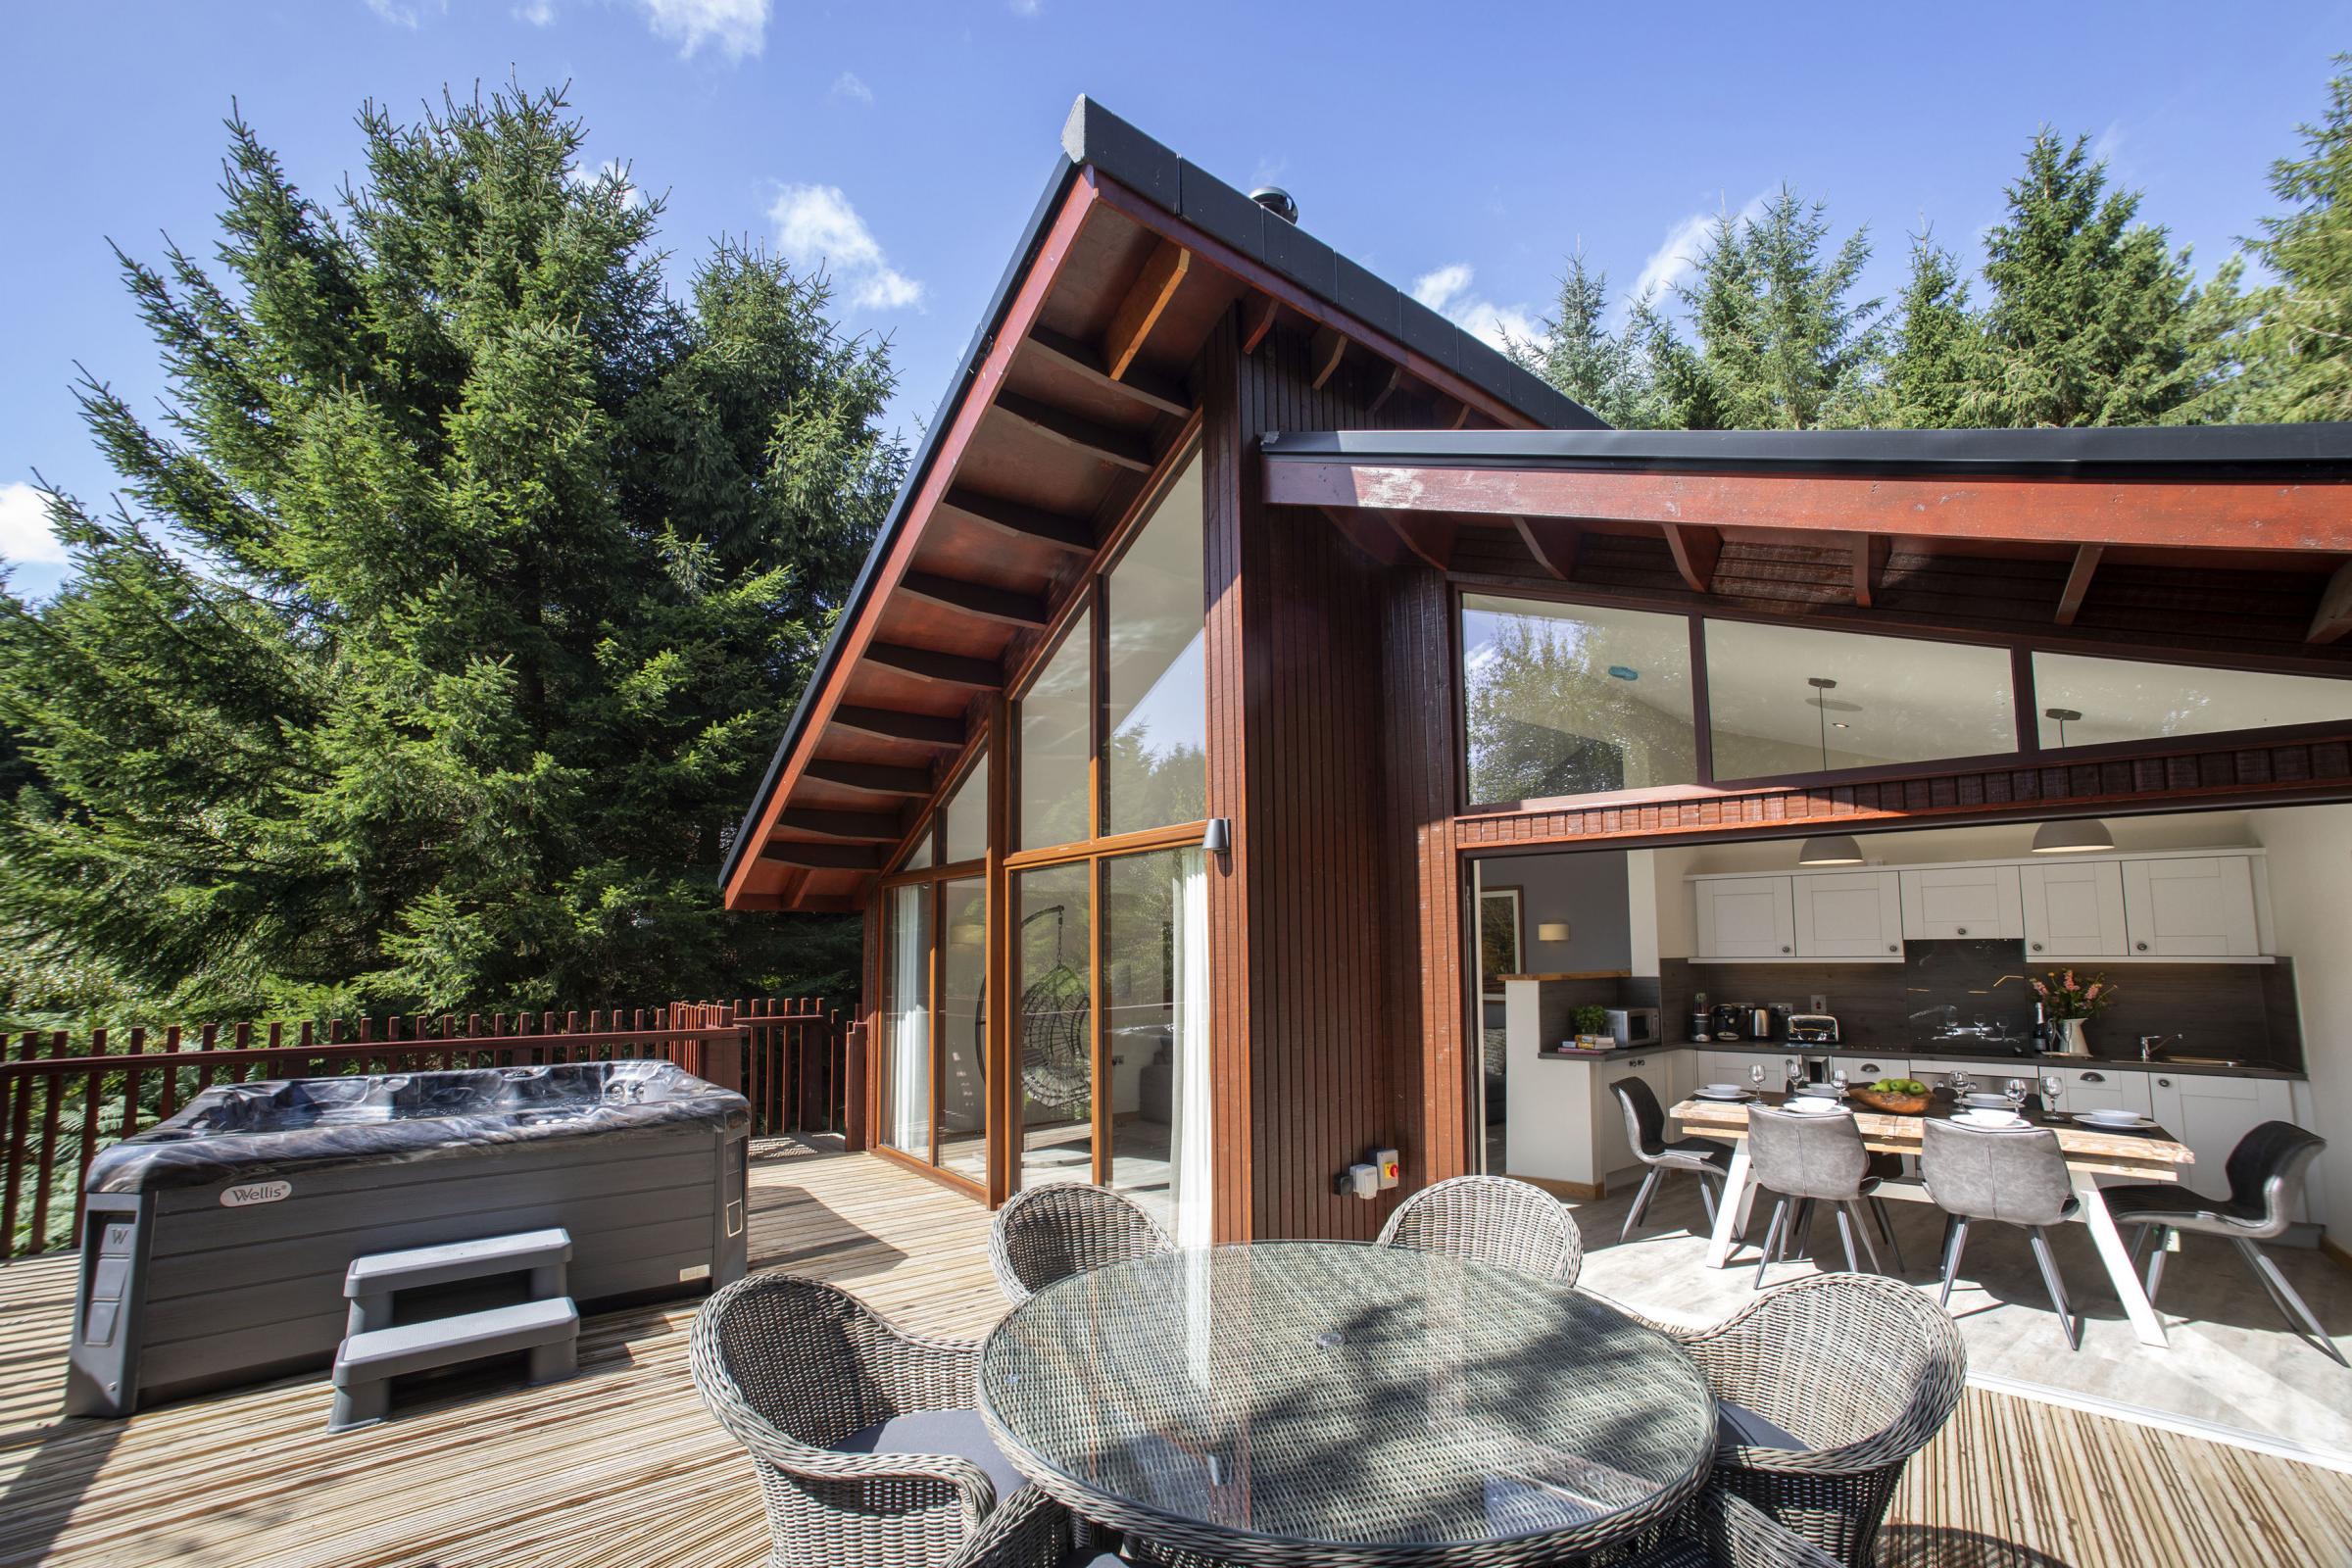 Forest Holidays White Willow lodge at Delamere Forest. Photo: Forest Holidays/PA